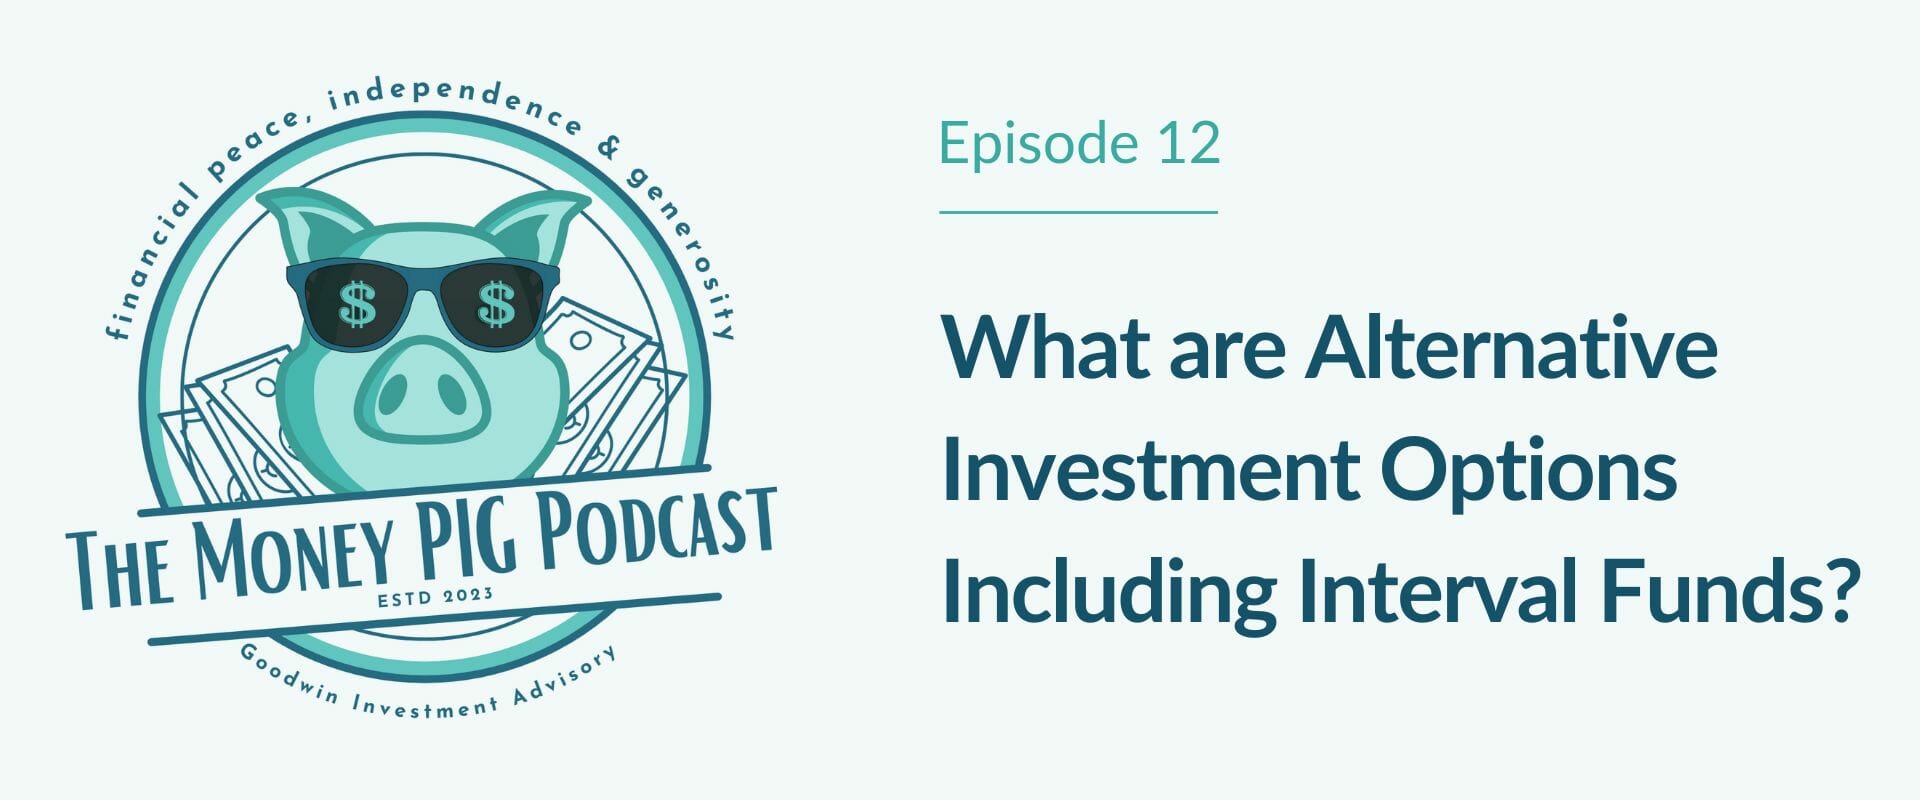 What are Alternative Investment Options Including Interval Funds?